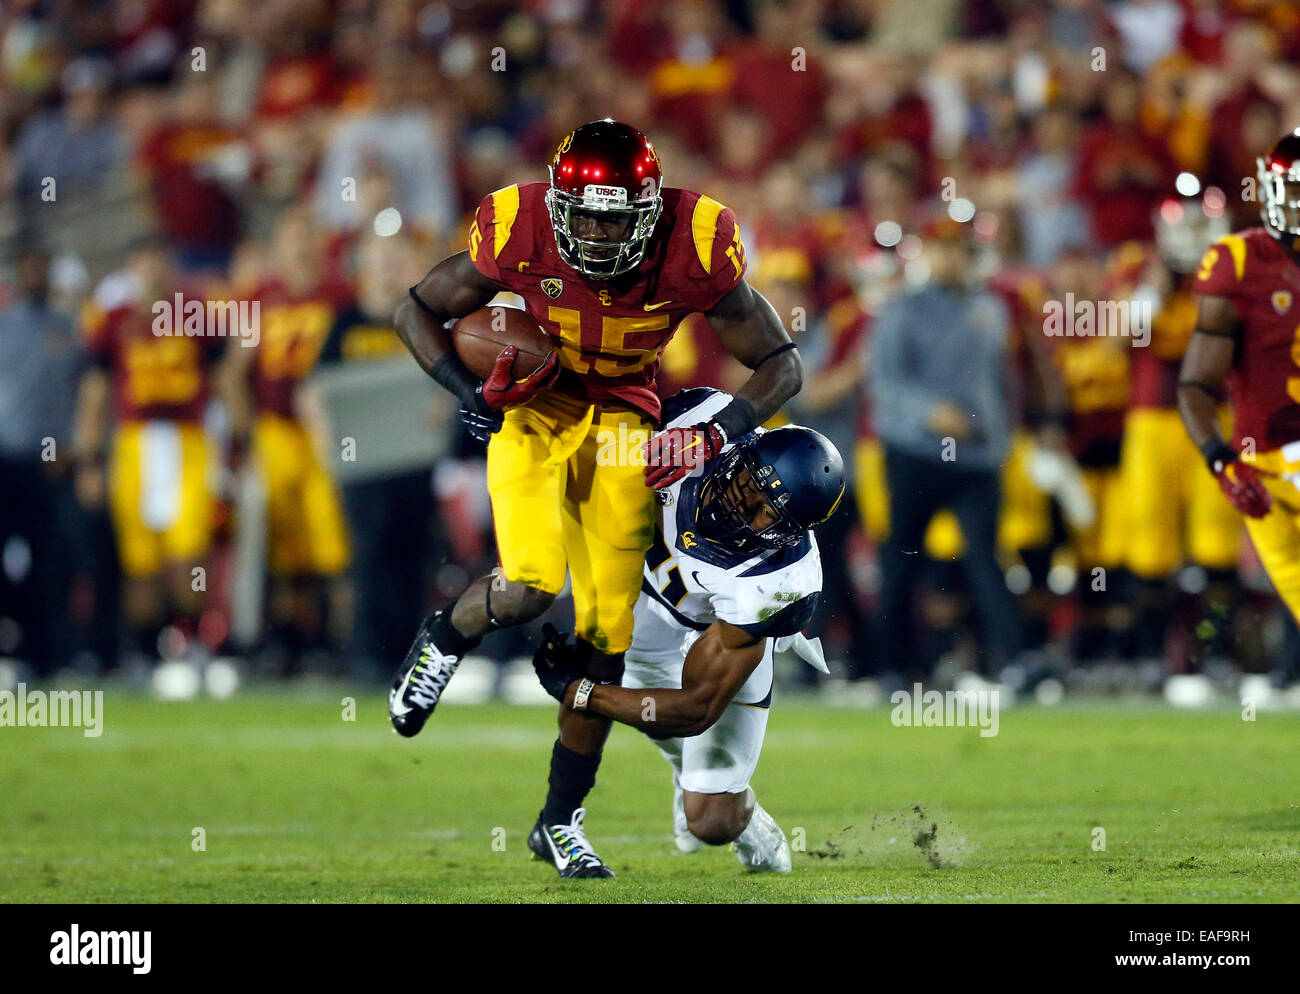 Los Angeles, CAlifornia, USA. 13th Nov, 2014. USC Trojans wide receiver Nelson Agholor #15 makes a catch and is tackled by California Golden Bears safety Stefan McClure #21 during the NCAA Football game between the California Golden Bears and the USC Trojans at the Coliseum in Los Angeles, California. Credit:  Cal Sport Media/Alamy Live News Stock Photo